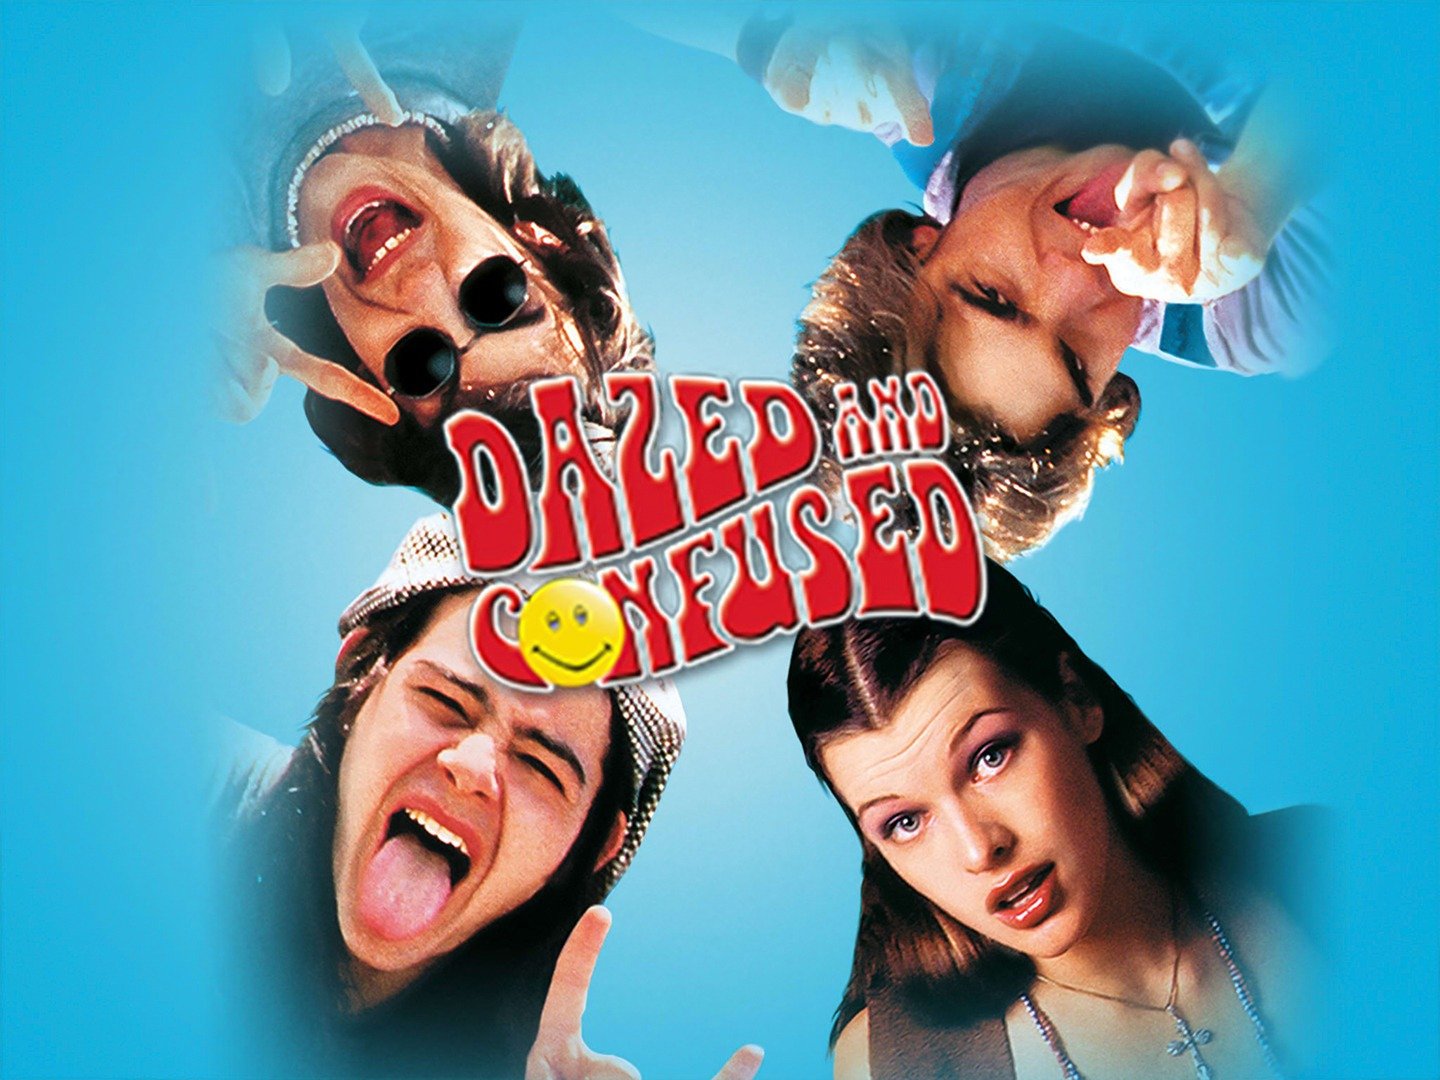 Dazed and Confused: Trailer 1 - Trailers & Videos - Rotten Tomatoes